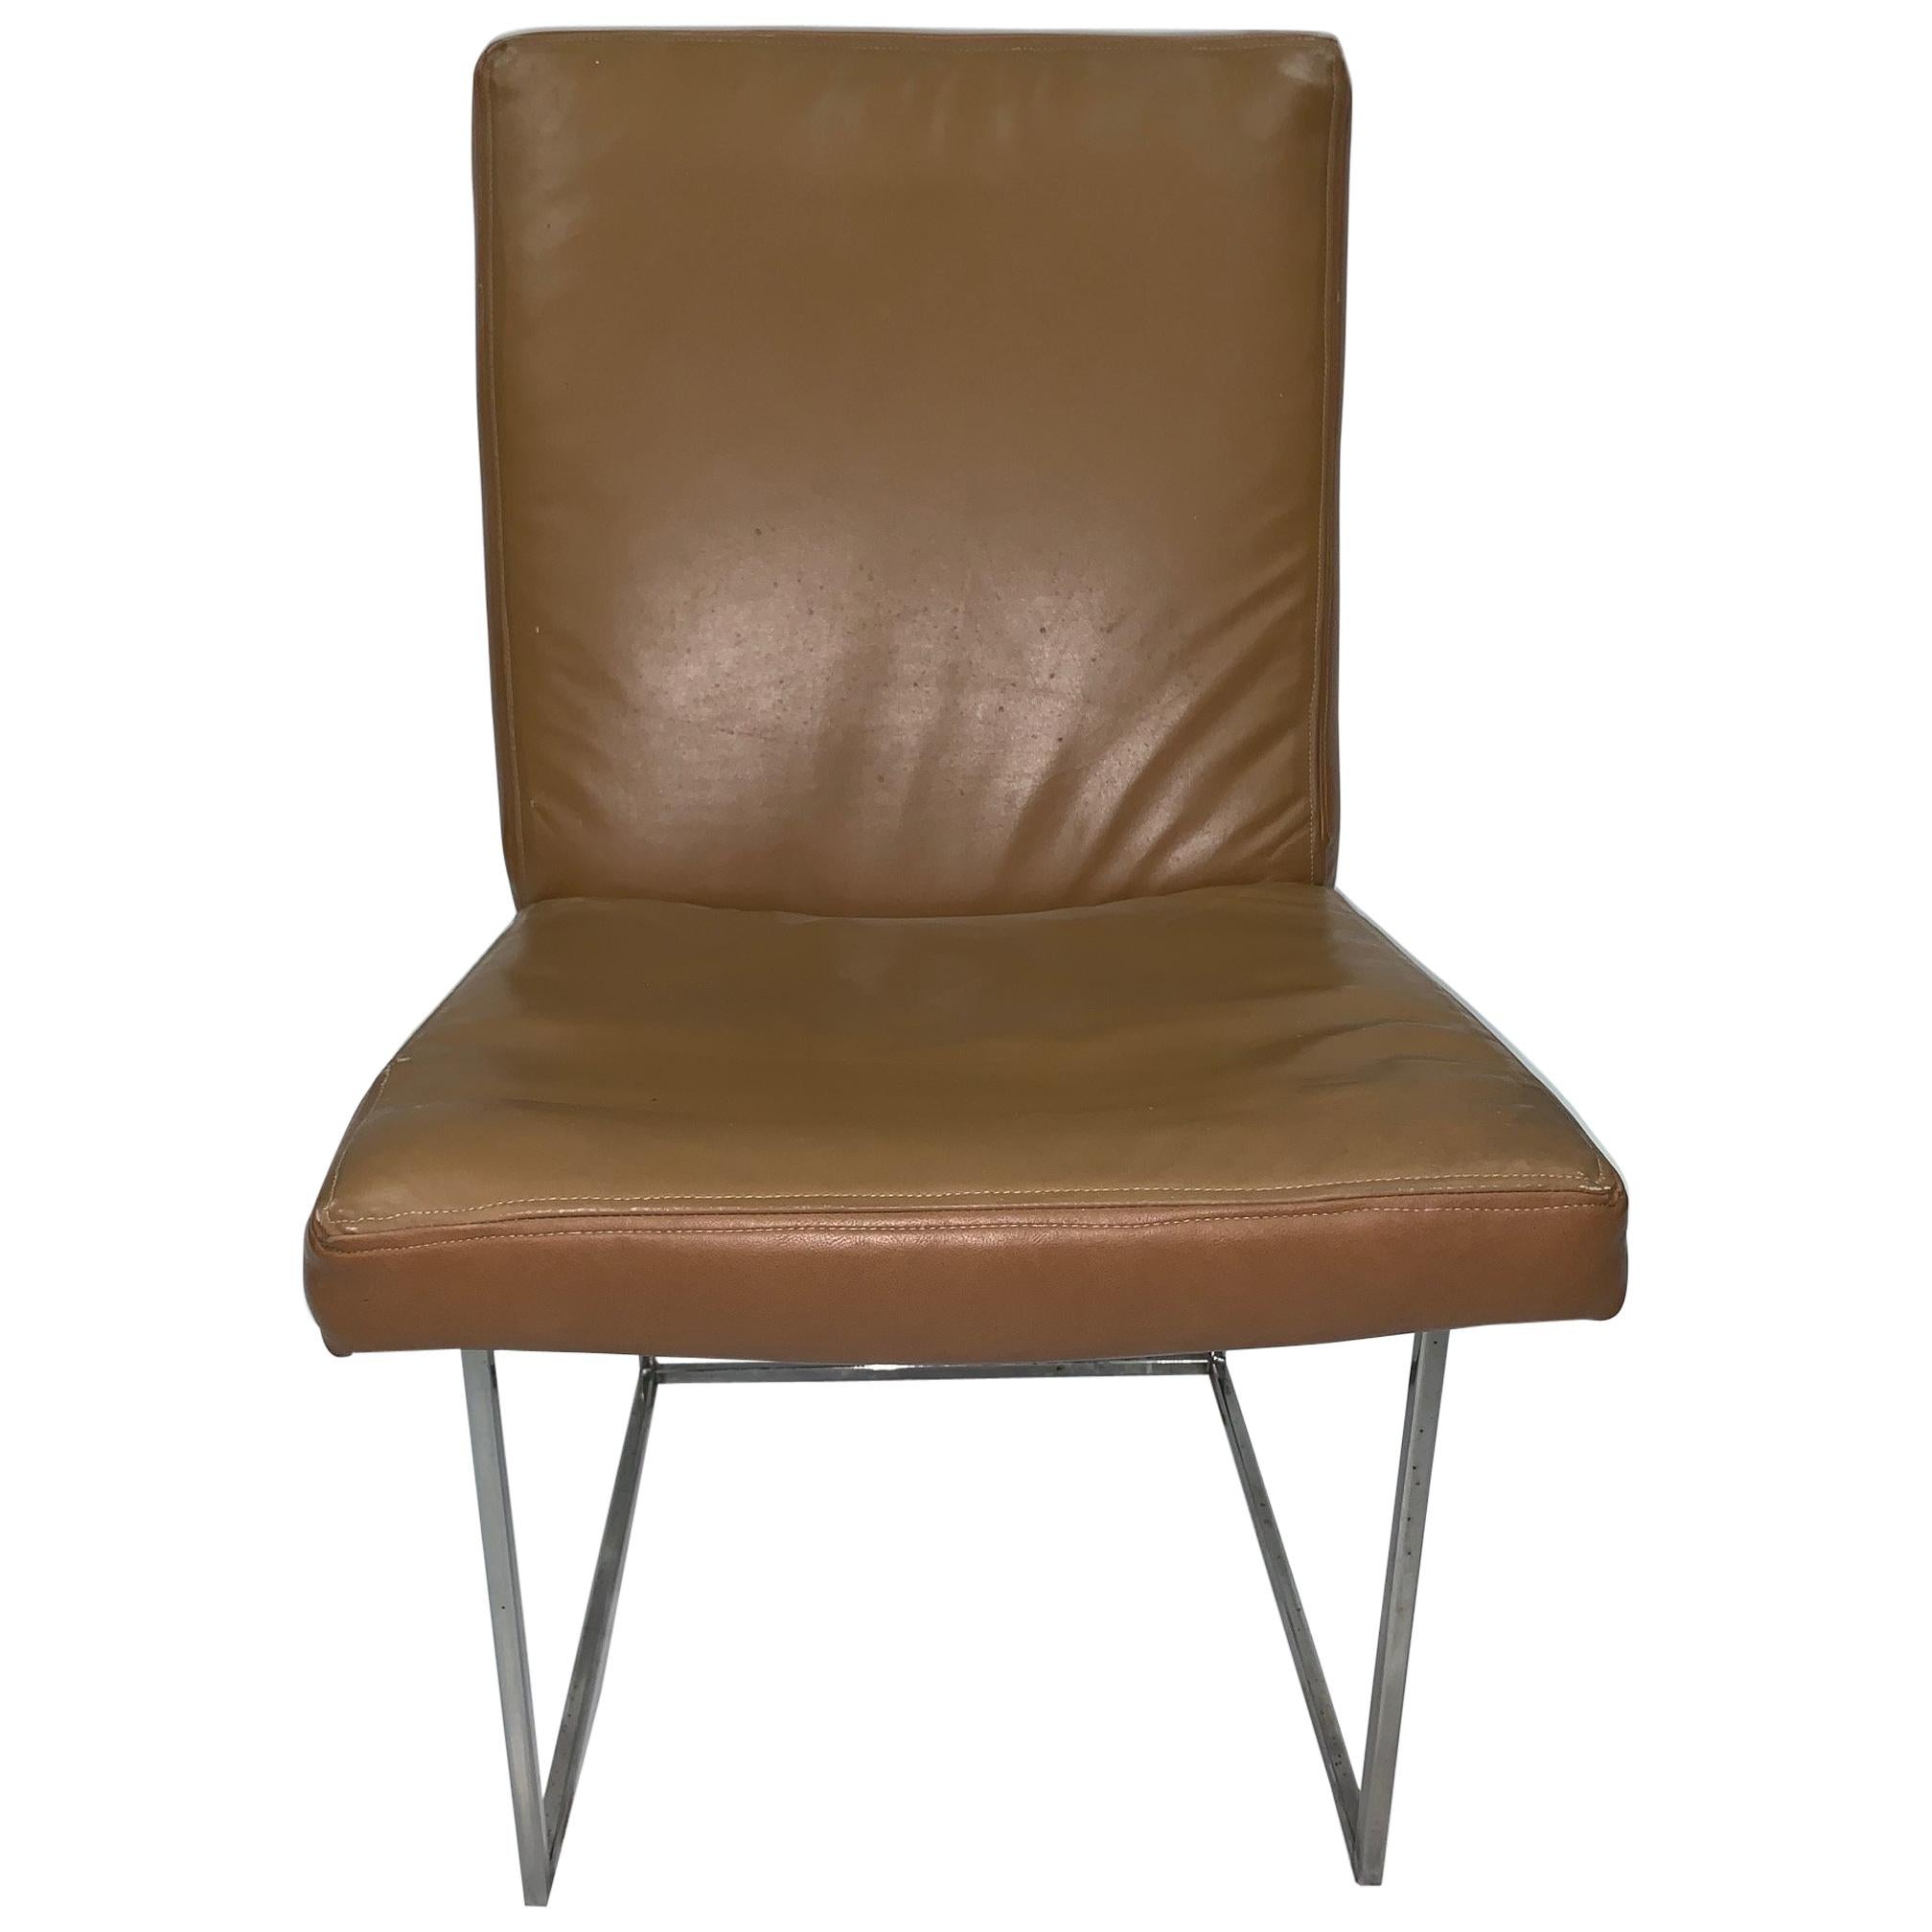 4 Leather Milo Baughman Dining Chairs -original leather For Sale